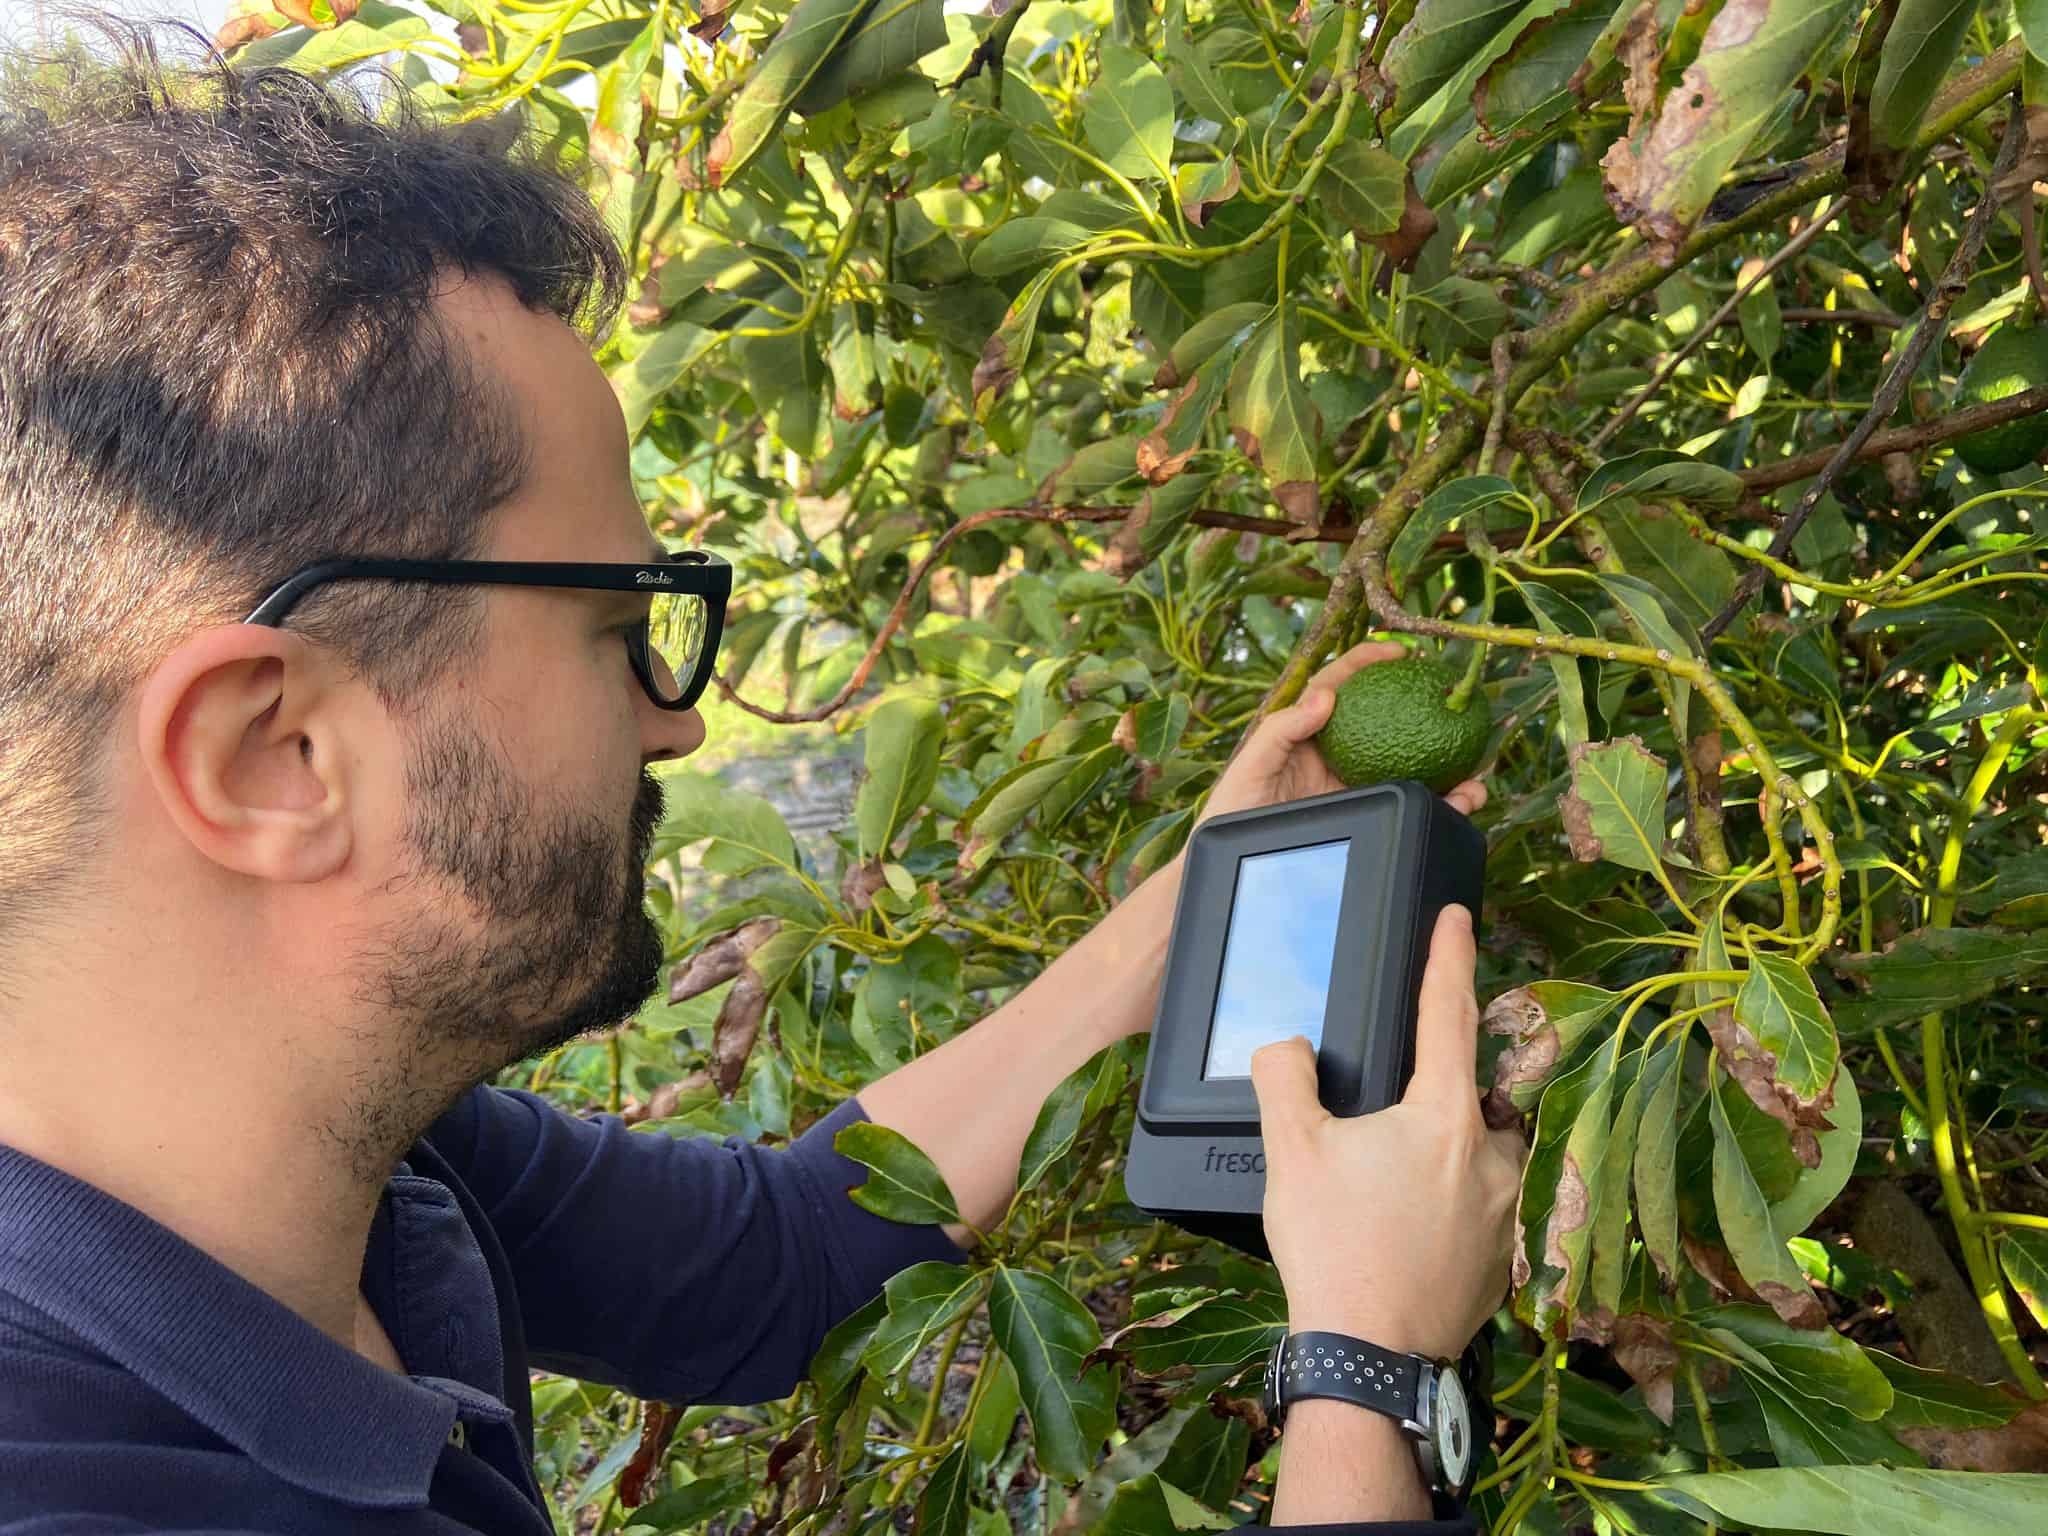 Ripe or unripe? This microwave scanner has the answer - without cutting fruit